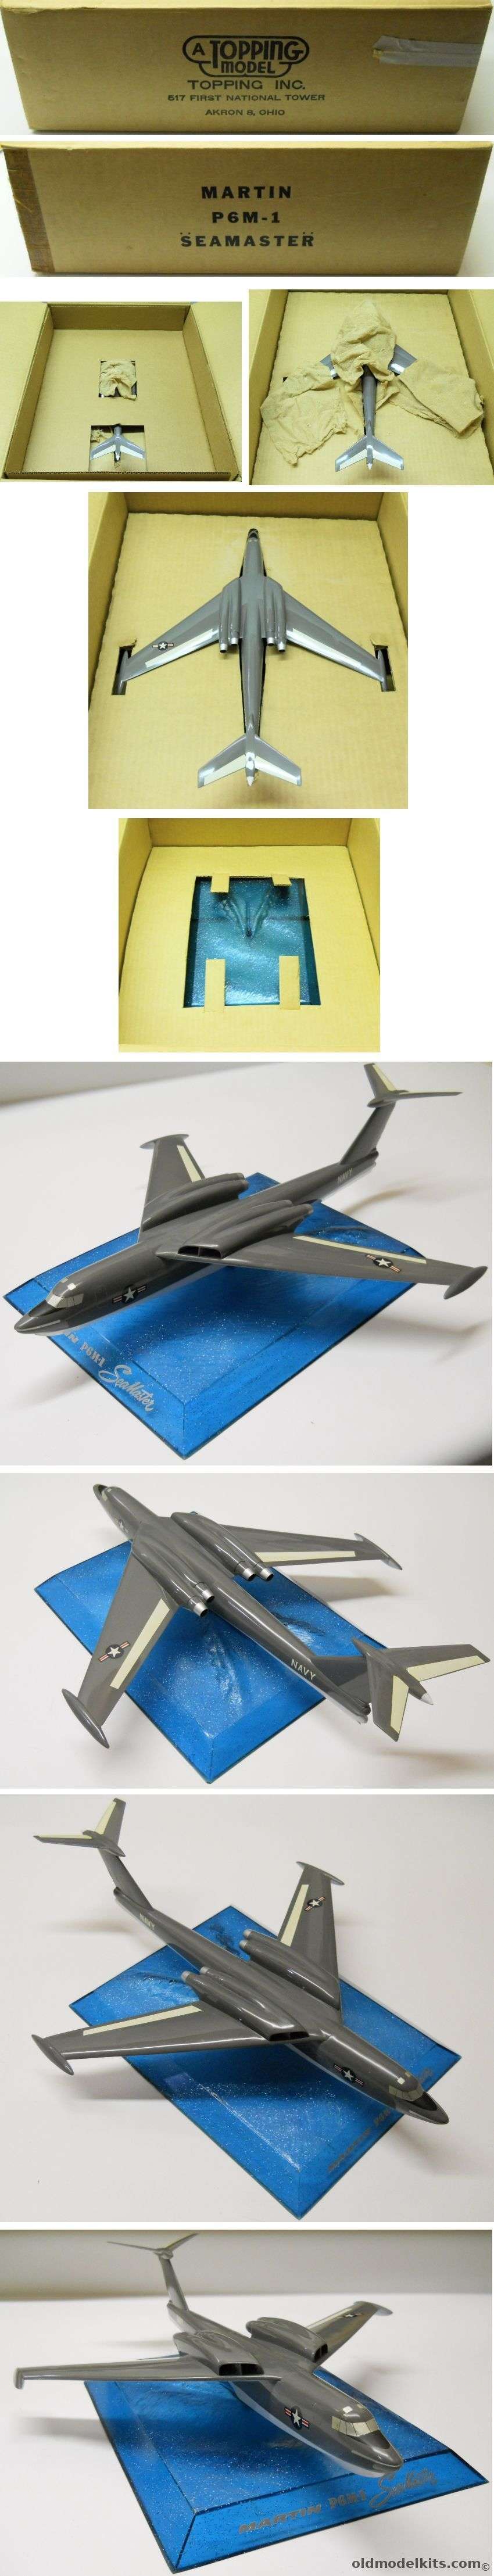 Topping Martin P6M-1 Seamaster - Factory Desktop Model In The Original Topping And Martin Boxes plastic model kit